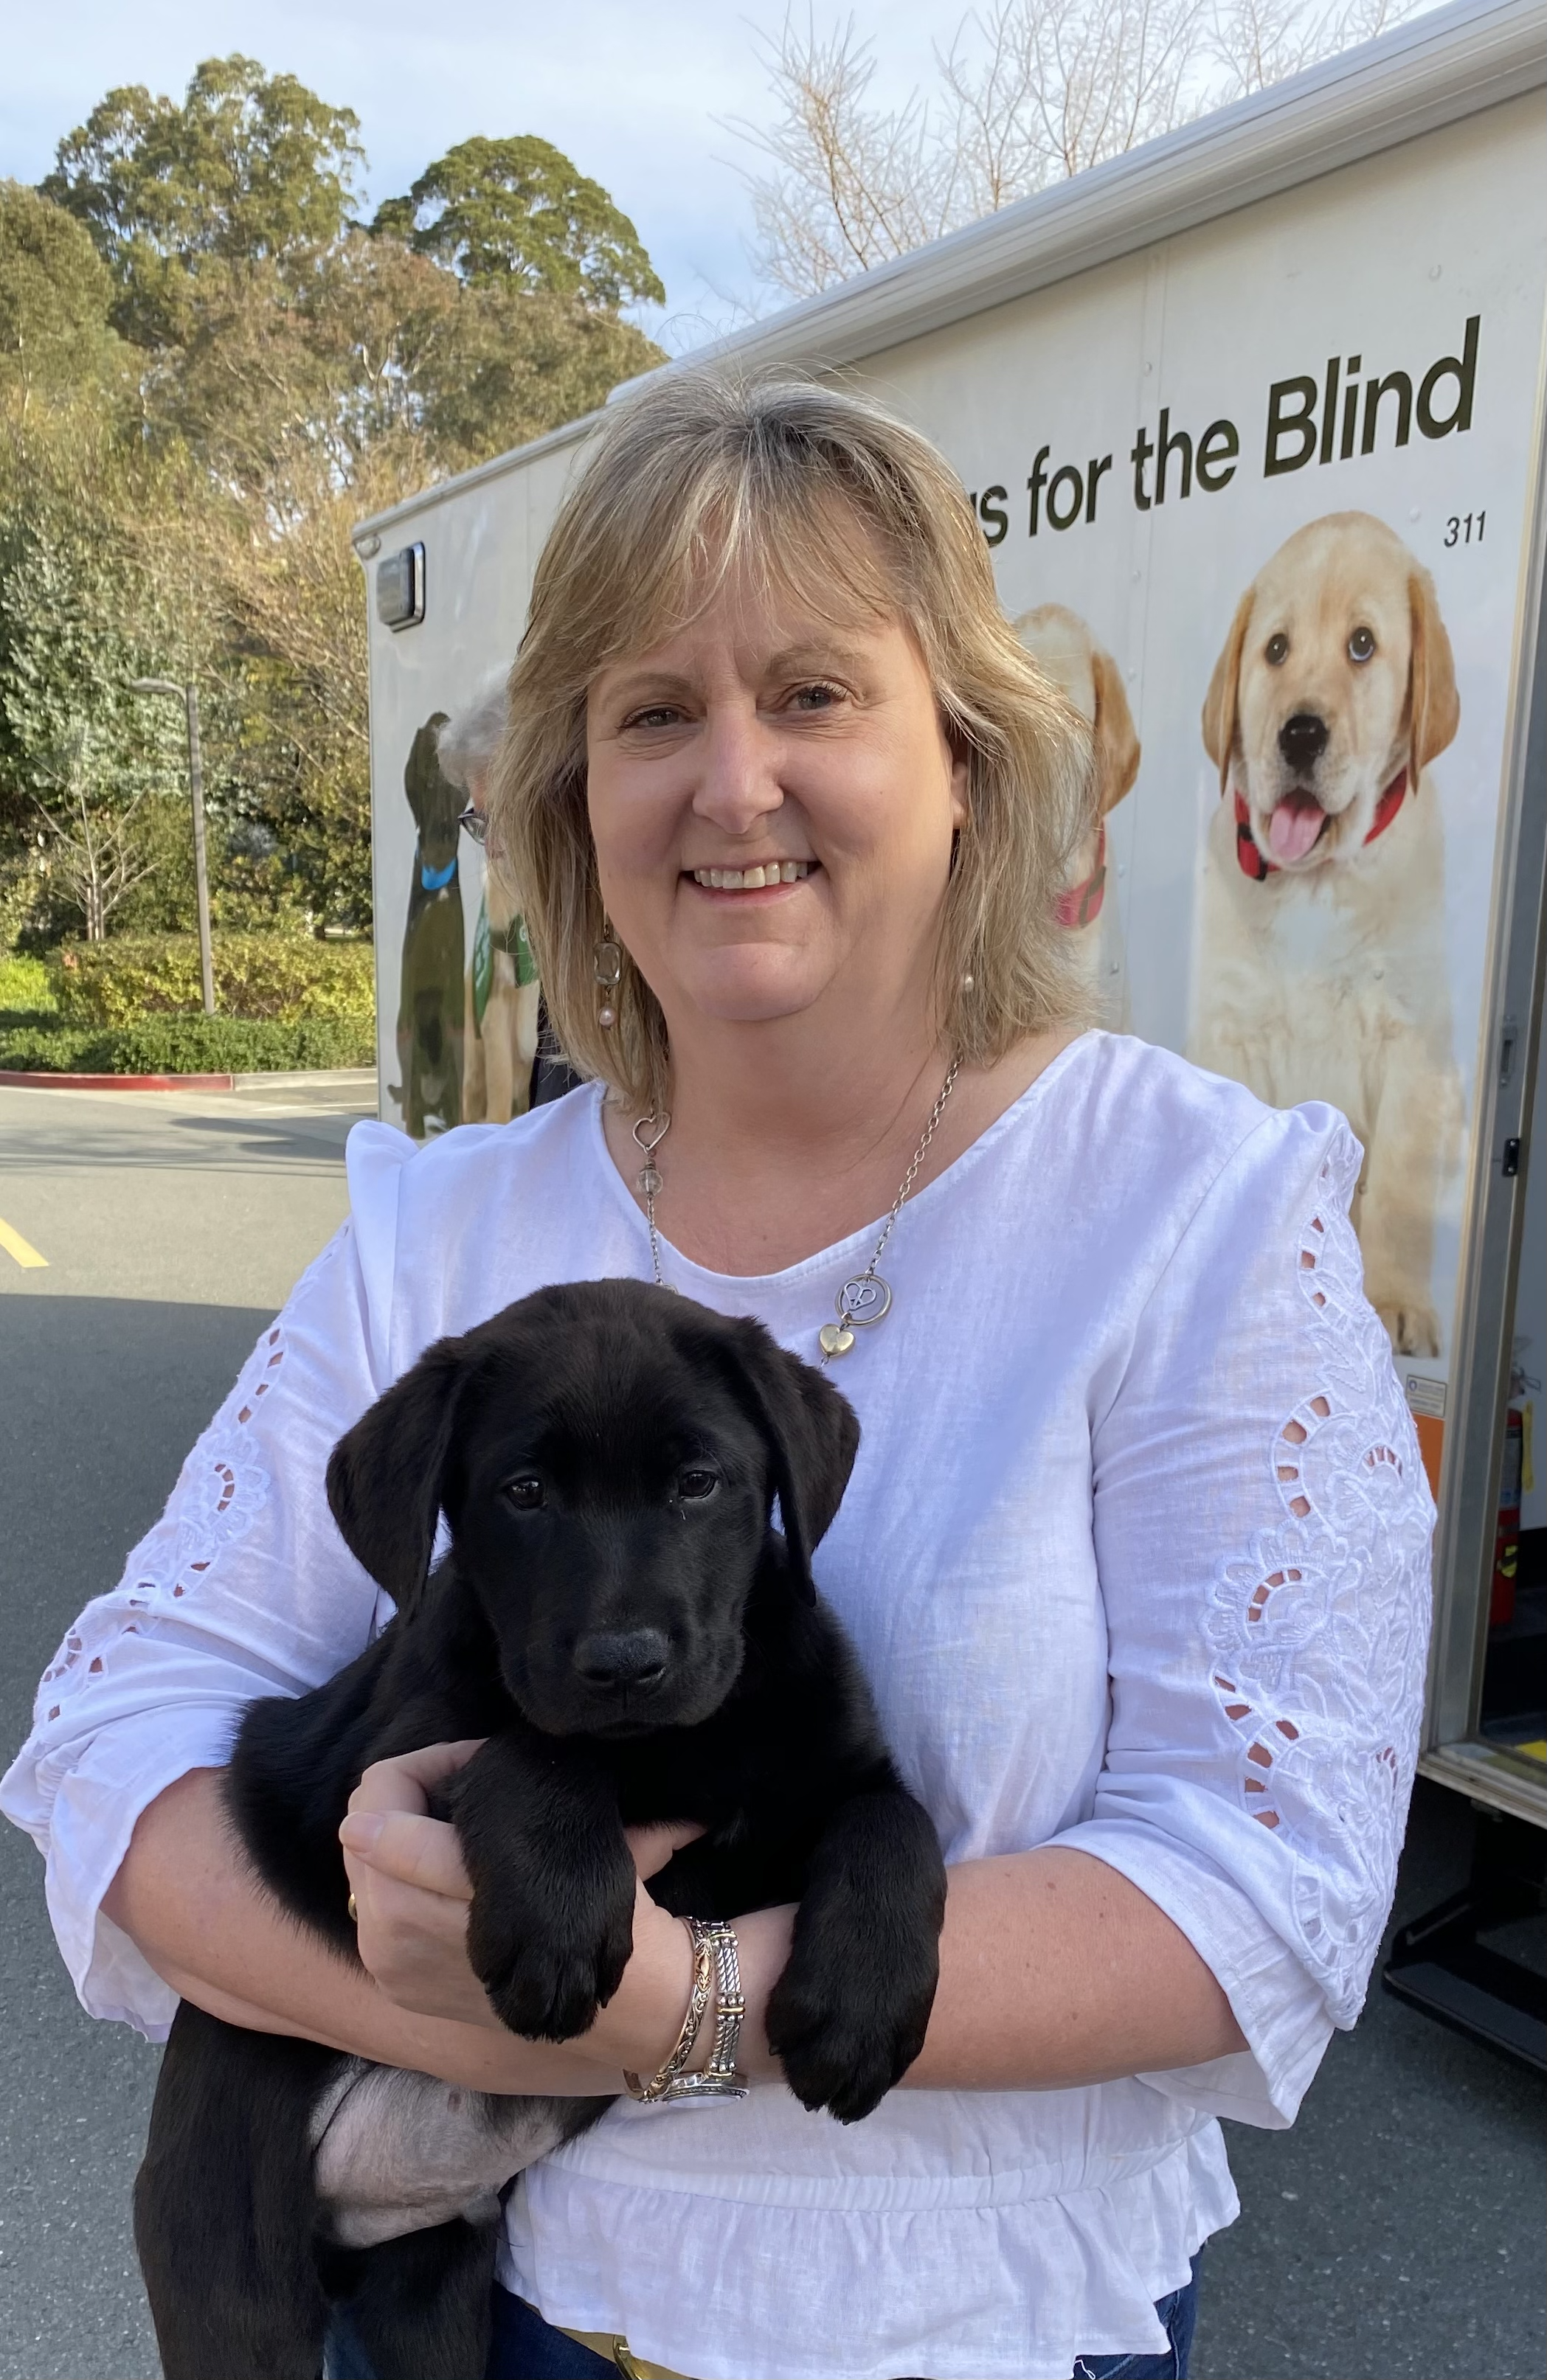 Sheri holds a black Lab puppy in front of the GDB Puppy Truck. She has blonde hair and is wearing a white top.